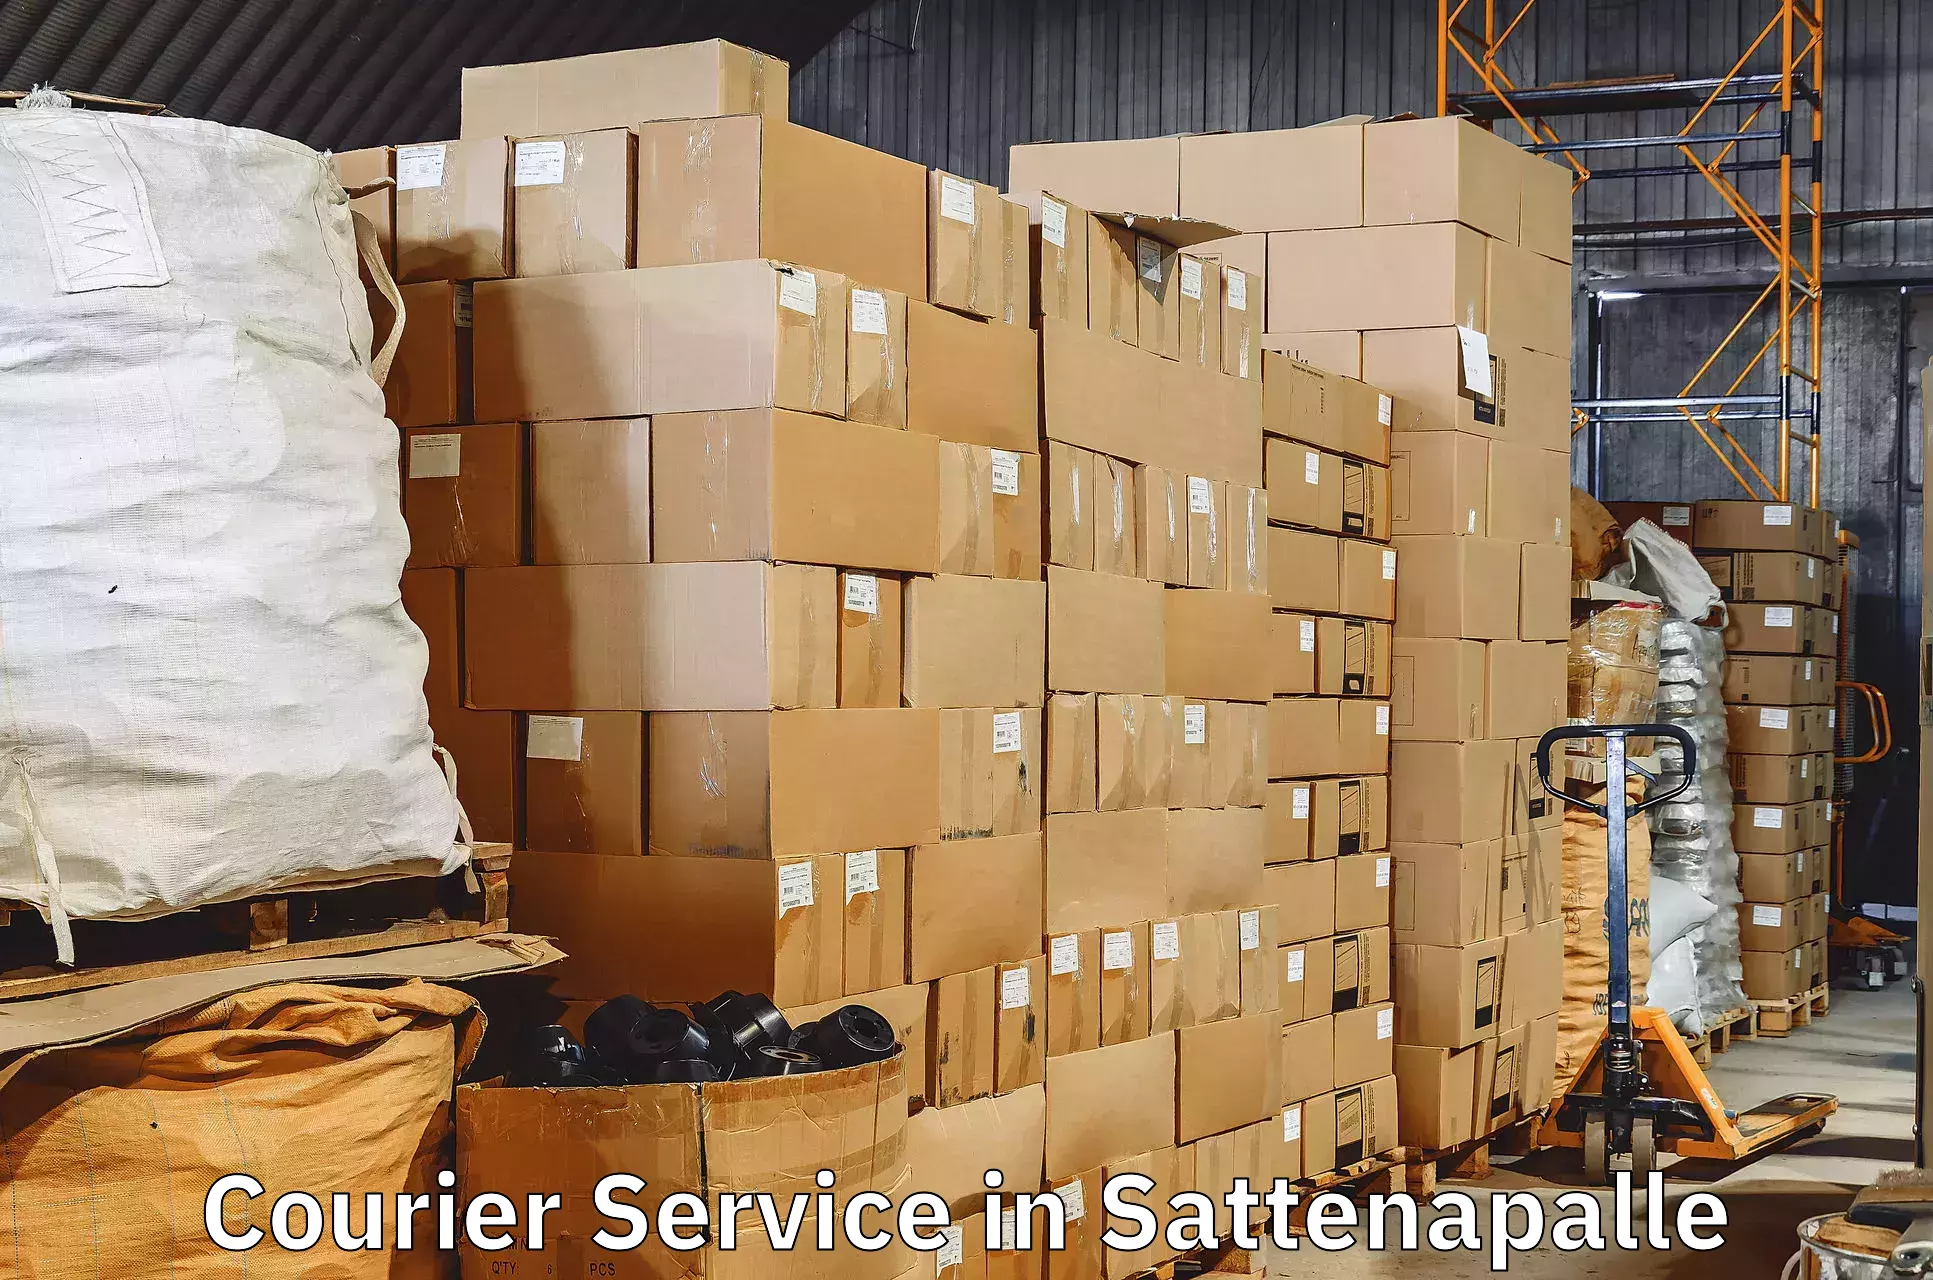 High-performance logistics in Sattenapalle